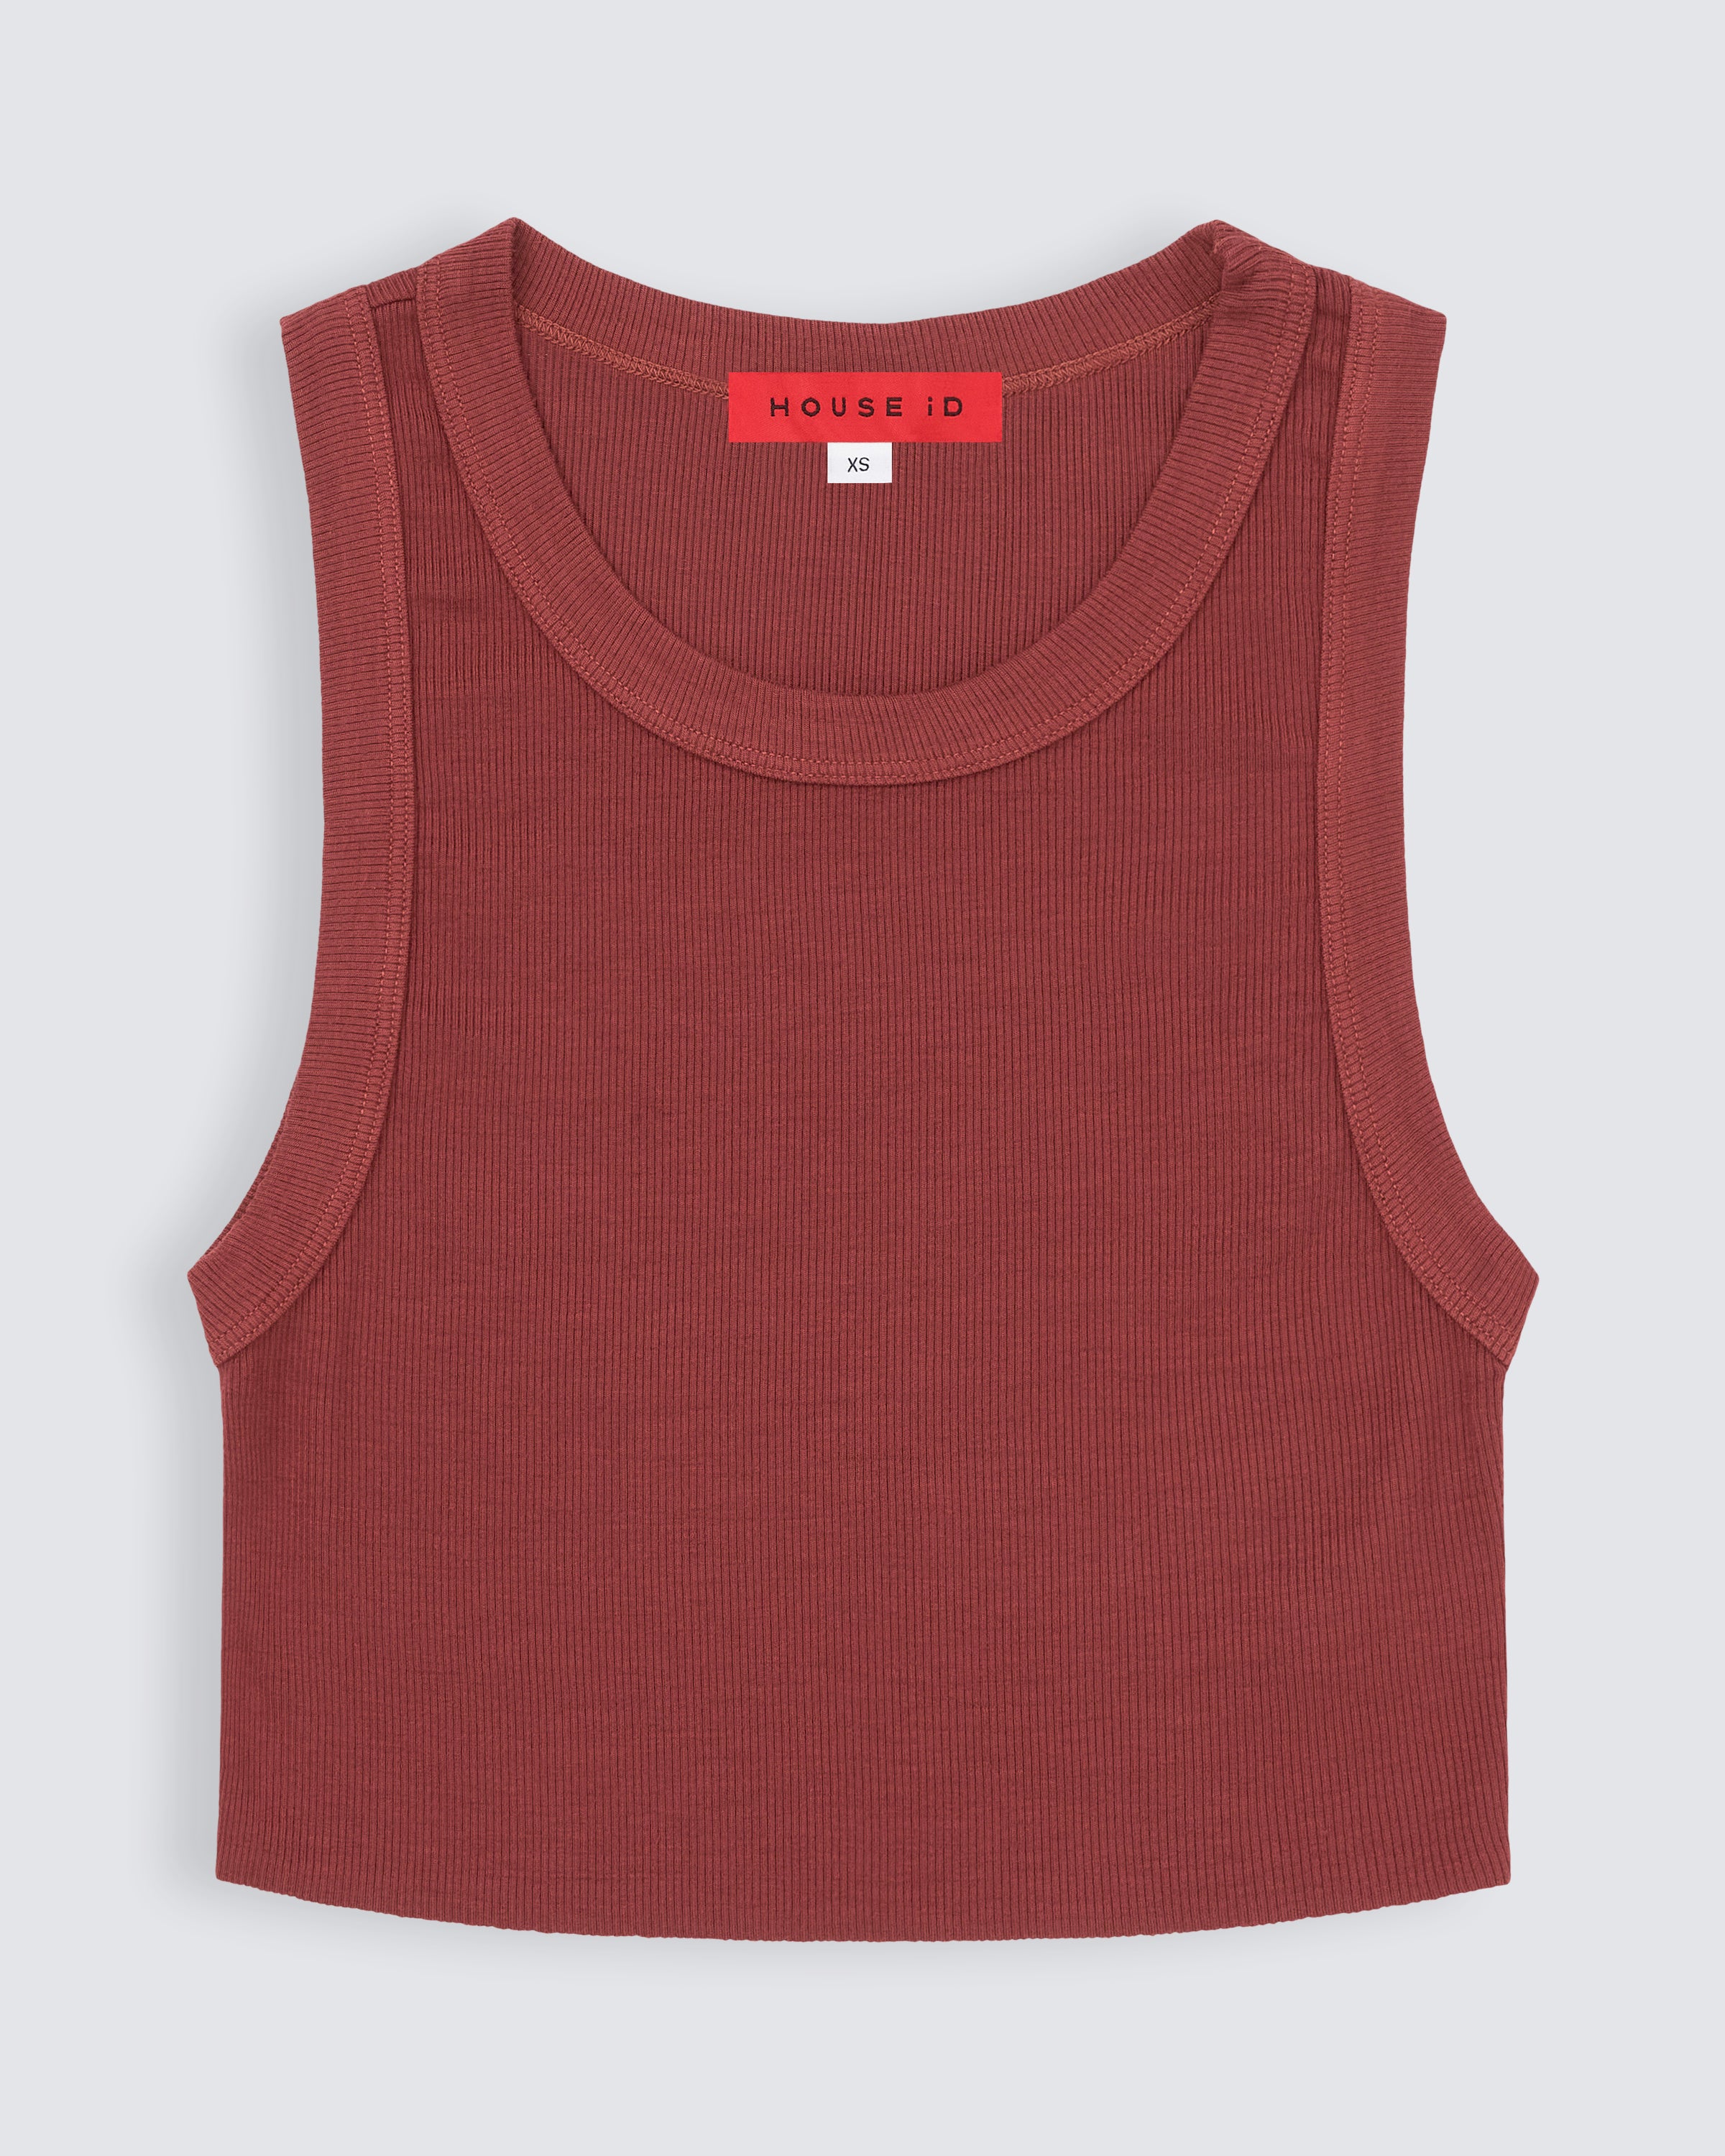 HOUSE iD | Cropped Ribbed Tank - Mars Red